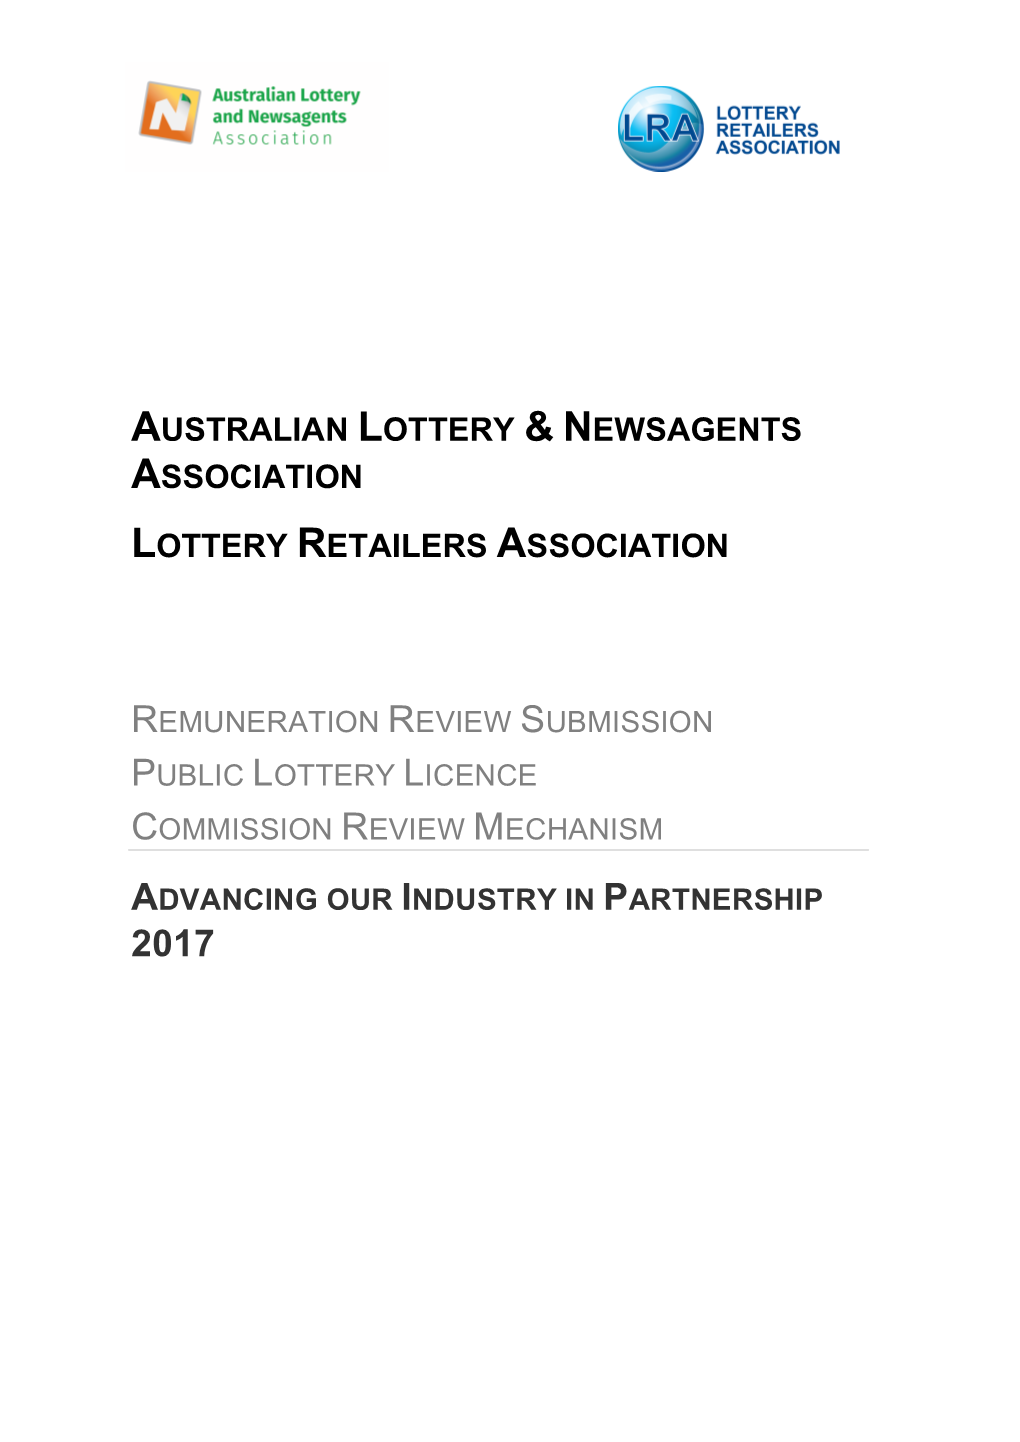 Advancing Our Industry in Partnership 2017